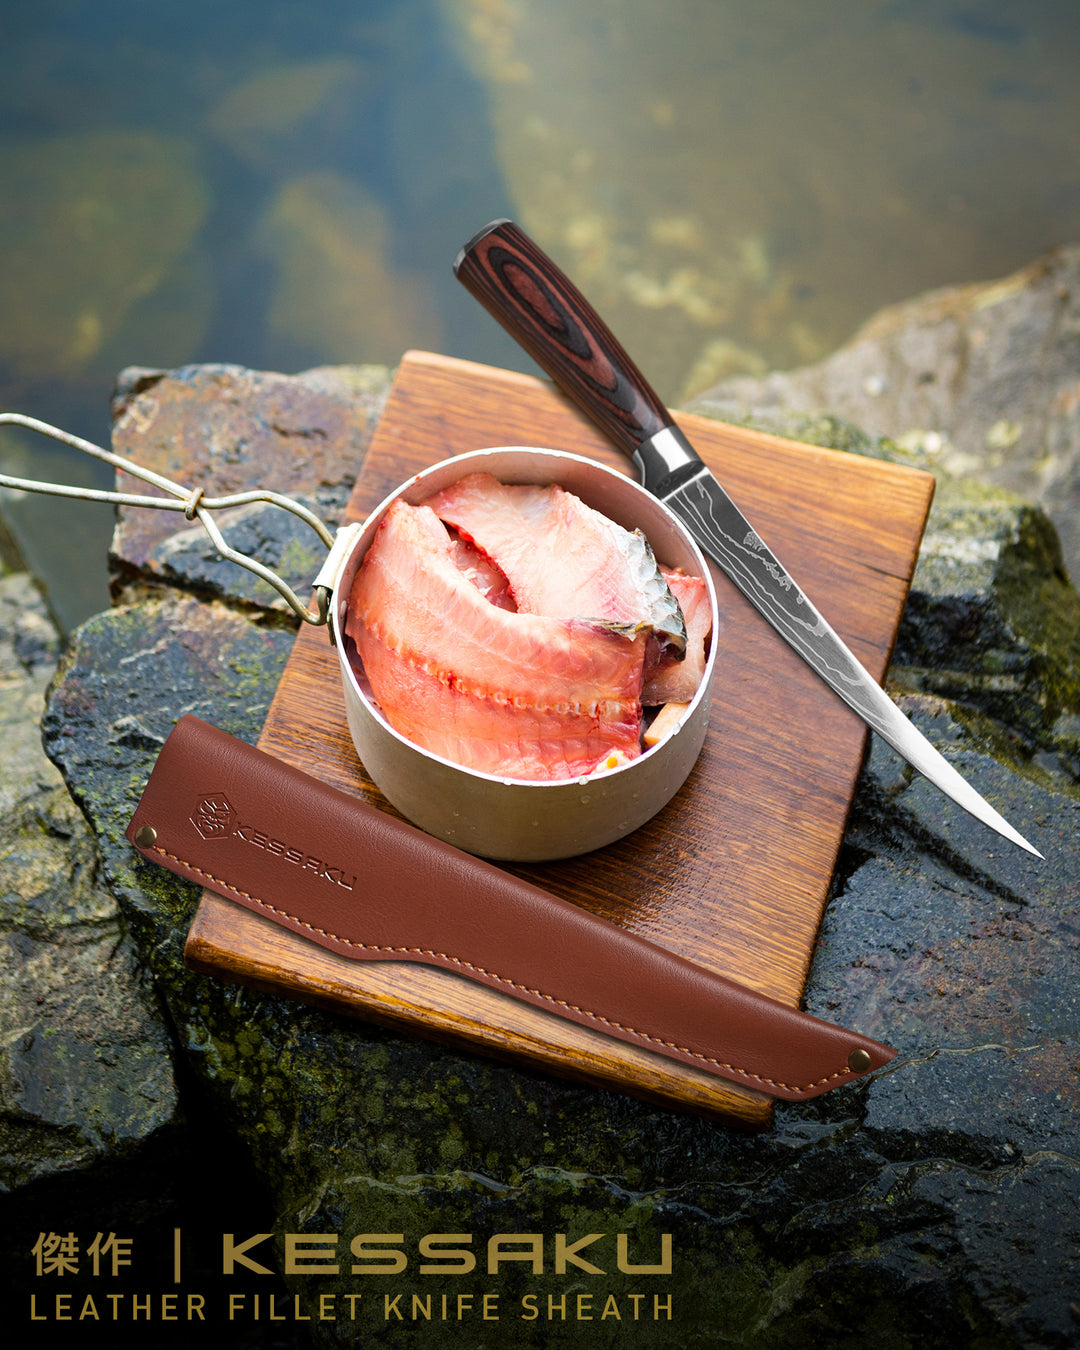 A filleted fish in a pot next to the Samurai Fillet Knife and Kessaku Leather Knife Sheath along the rocky banks of a river.